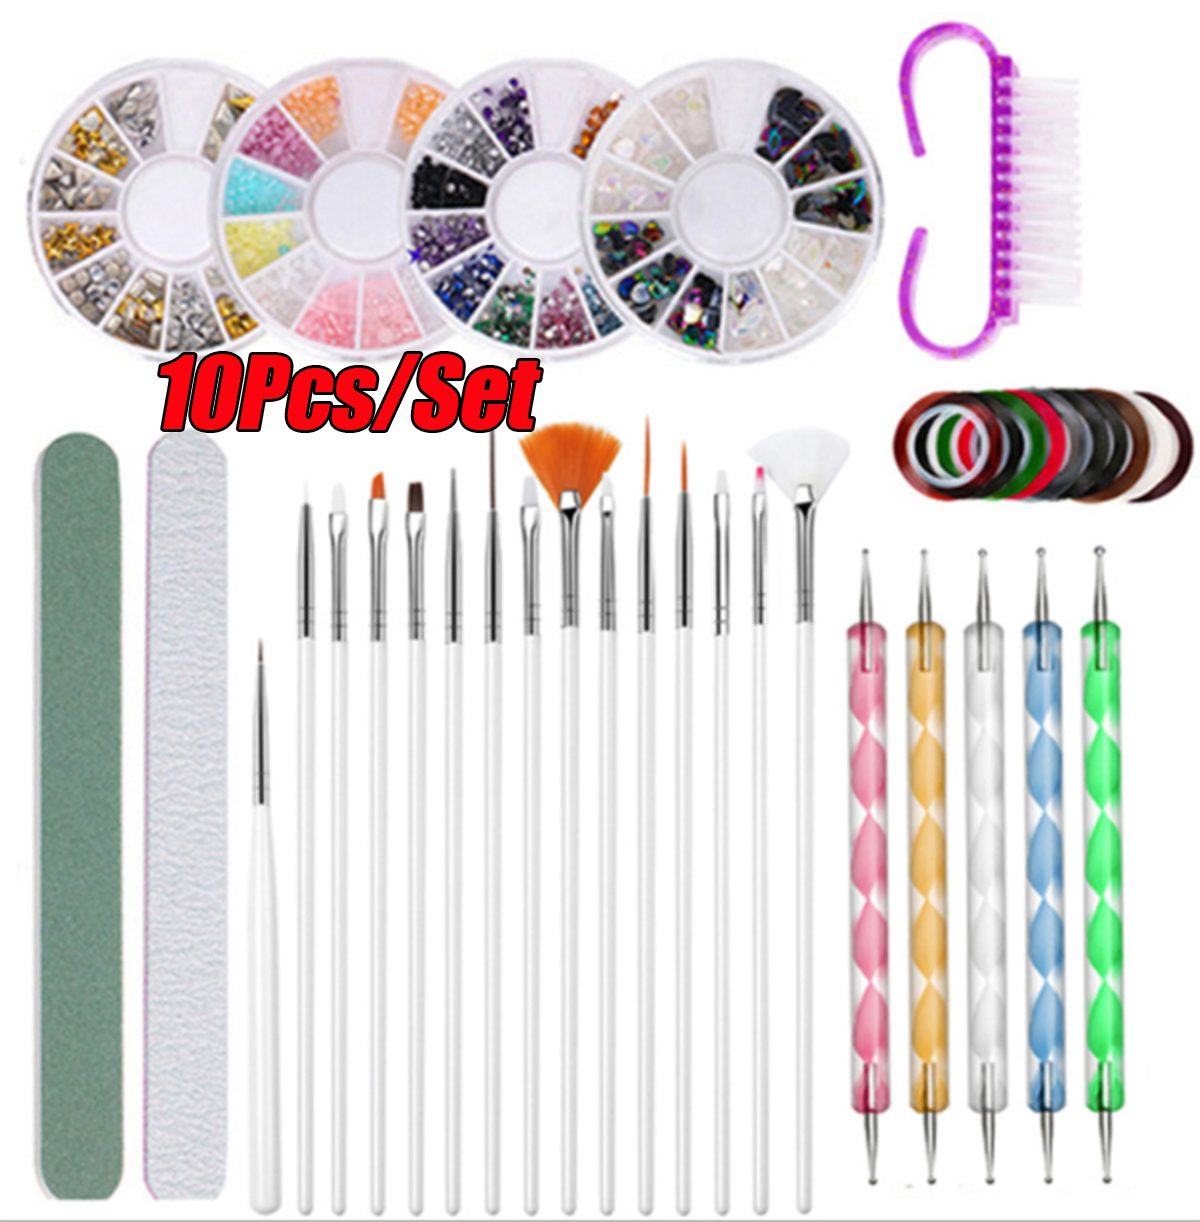 Dicasser 10pcs Set for Gel Polish, for Gel Nails Professional Nail Art Tools for Manicure/Pedicure Nail Art at Home, White